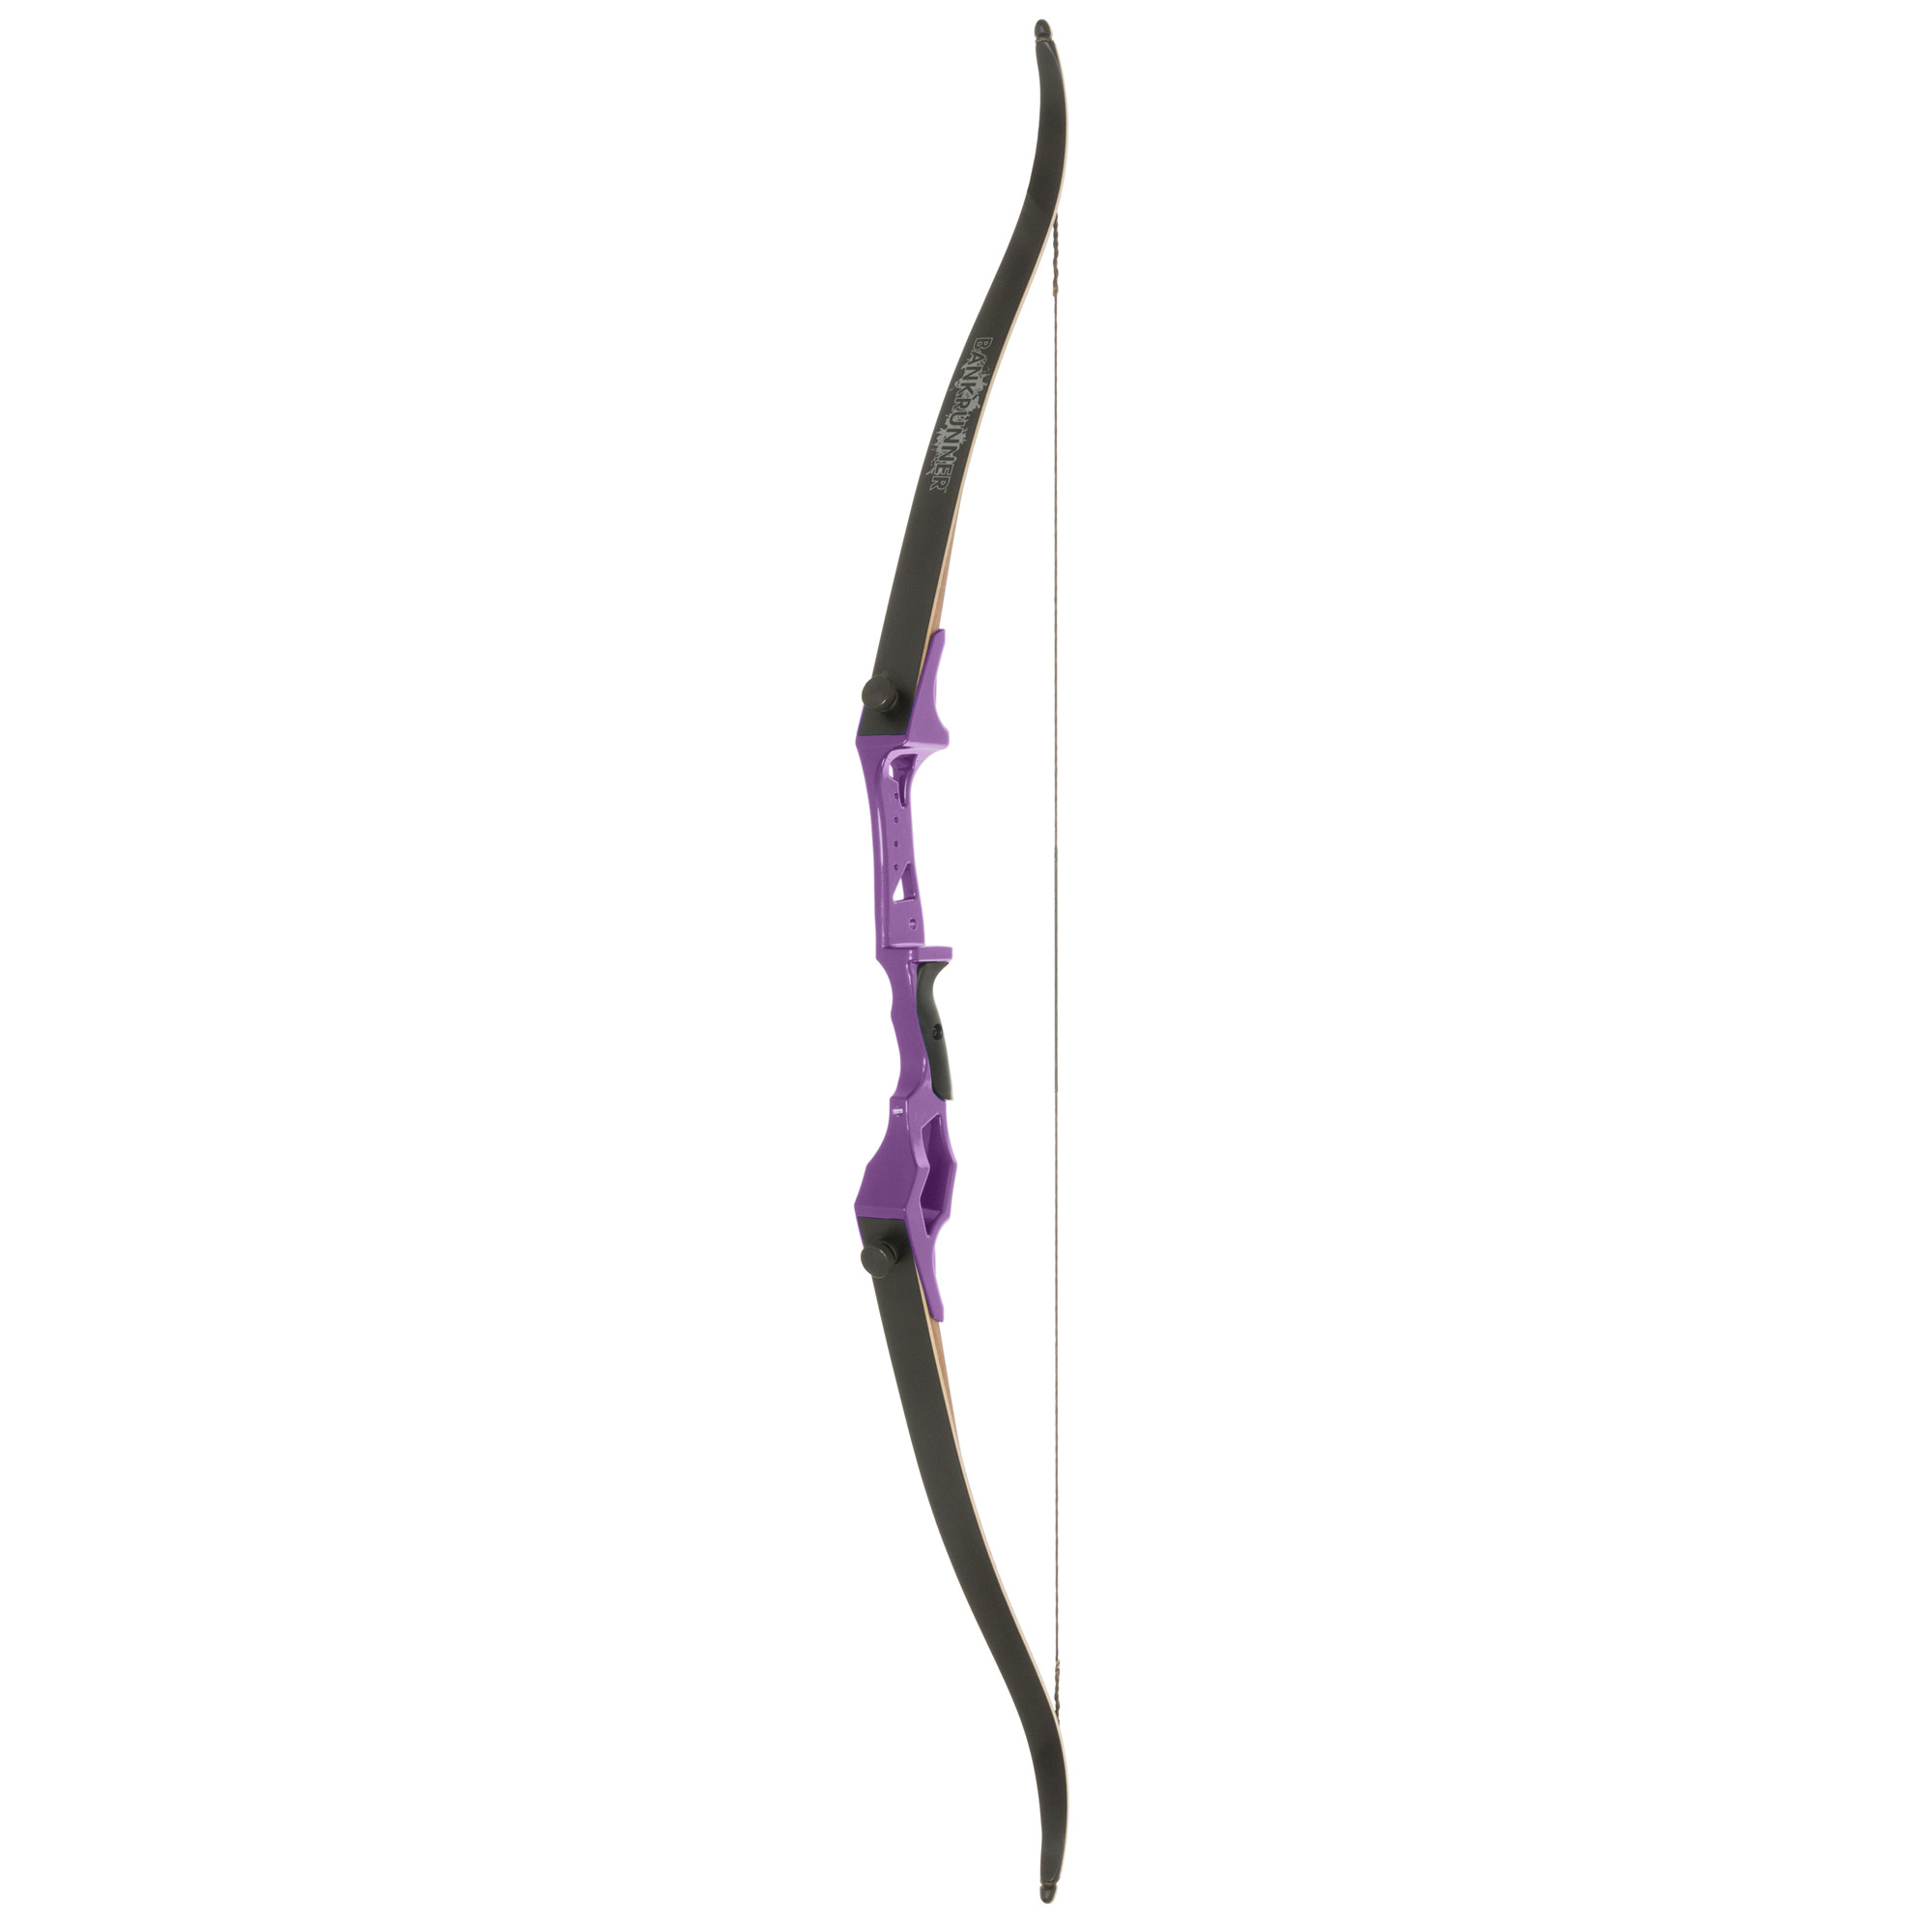 Fin Finder Bank Runner Bowfishing Recurve Blue 58 in. 20 lbs. RH